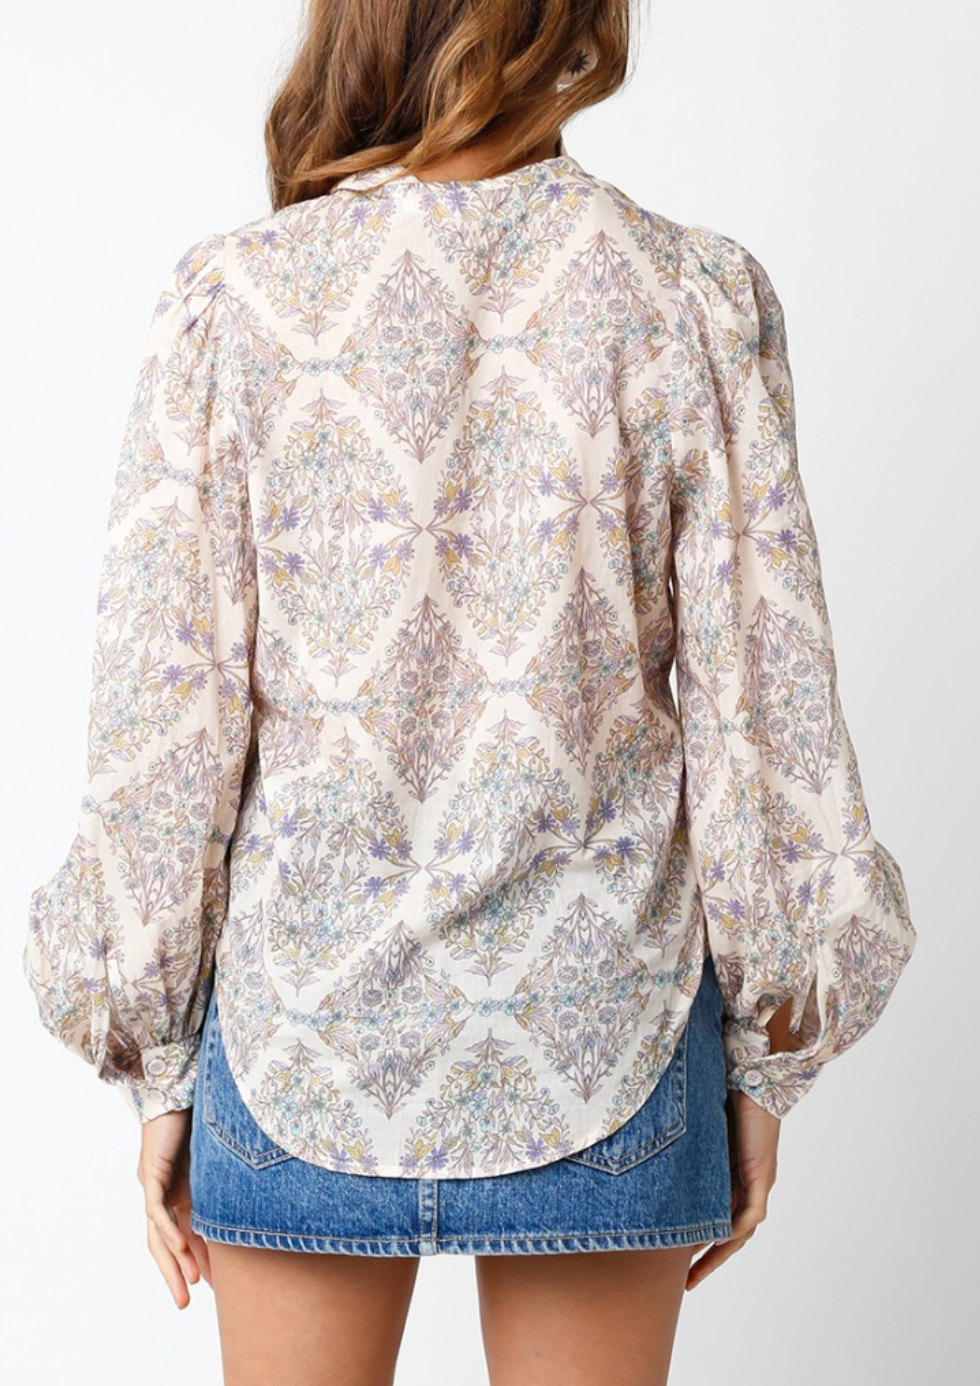 OLIVACEOUS BRENDA PRINTED BLOUSE